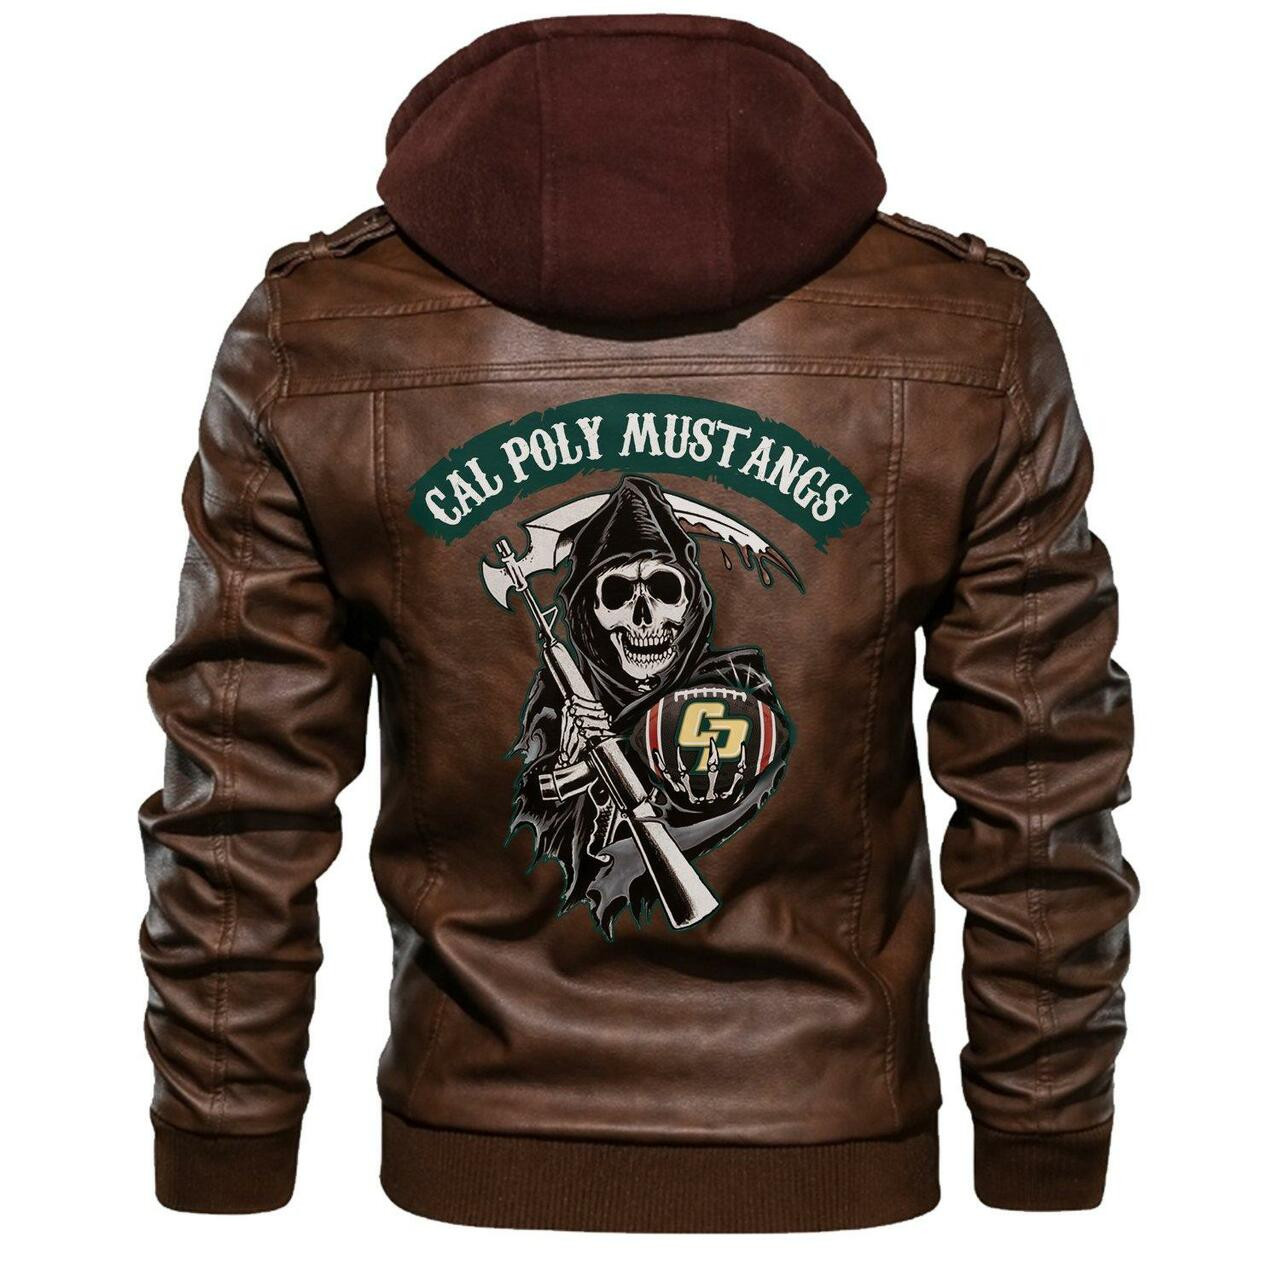 Our store has all of the latest leather jacket 85